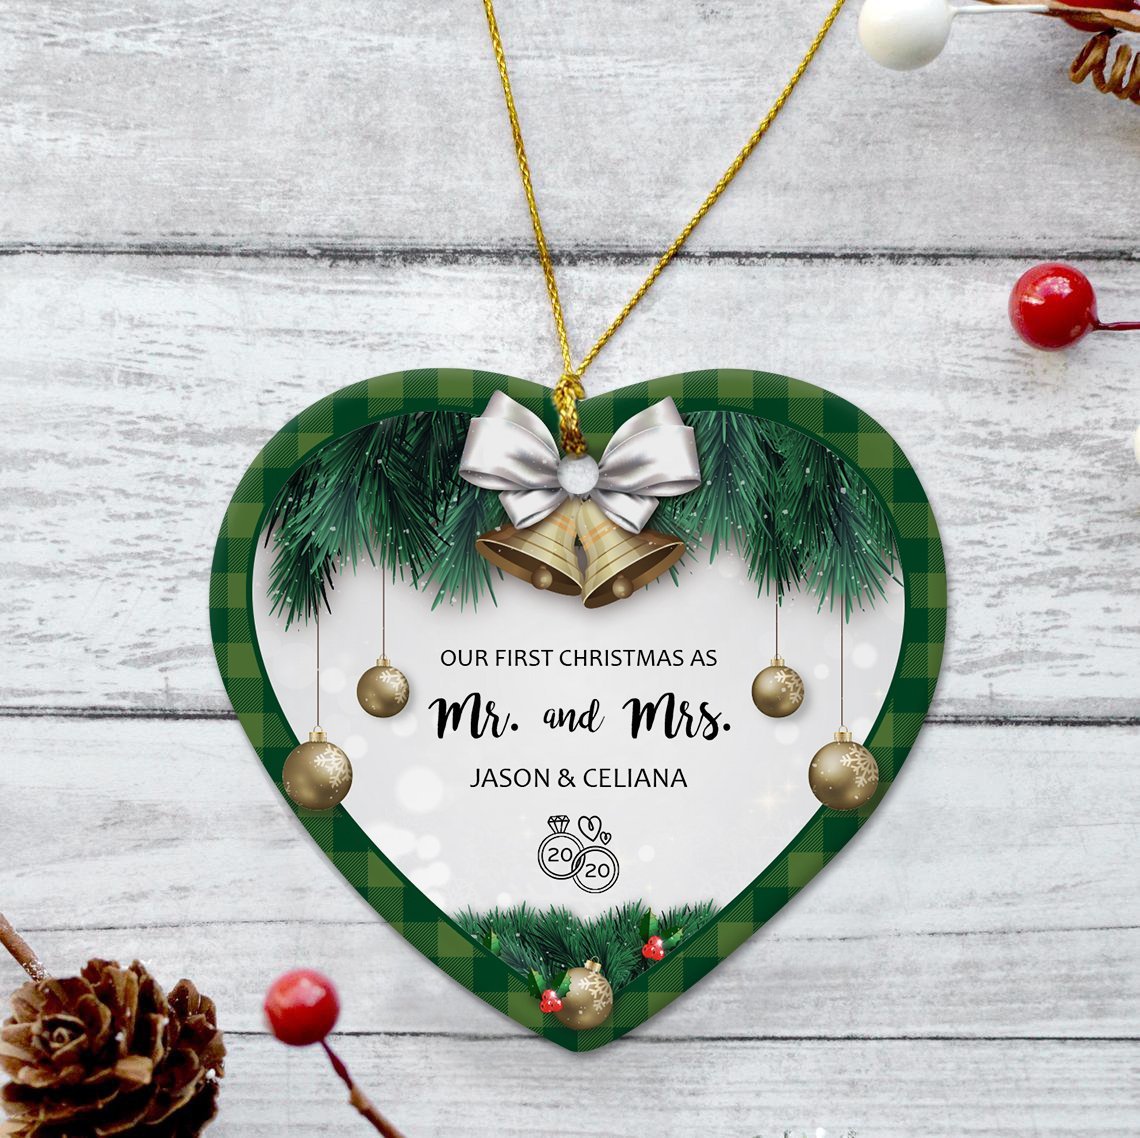 Ours First Christmas As Ms & Mrs Custom Text Decorative Christmas Heart Ornament 2 Sided